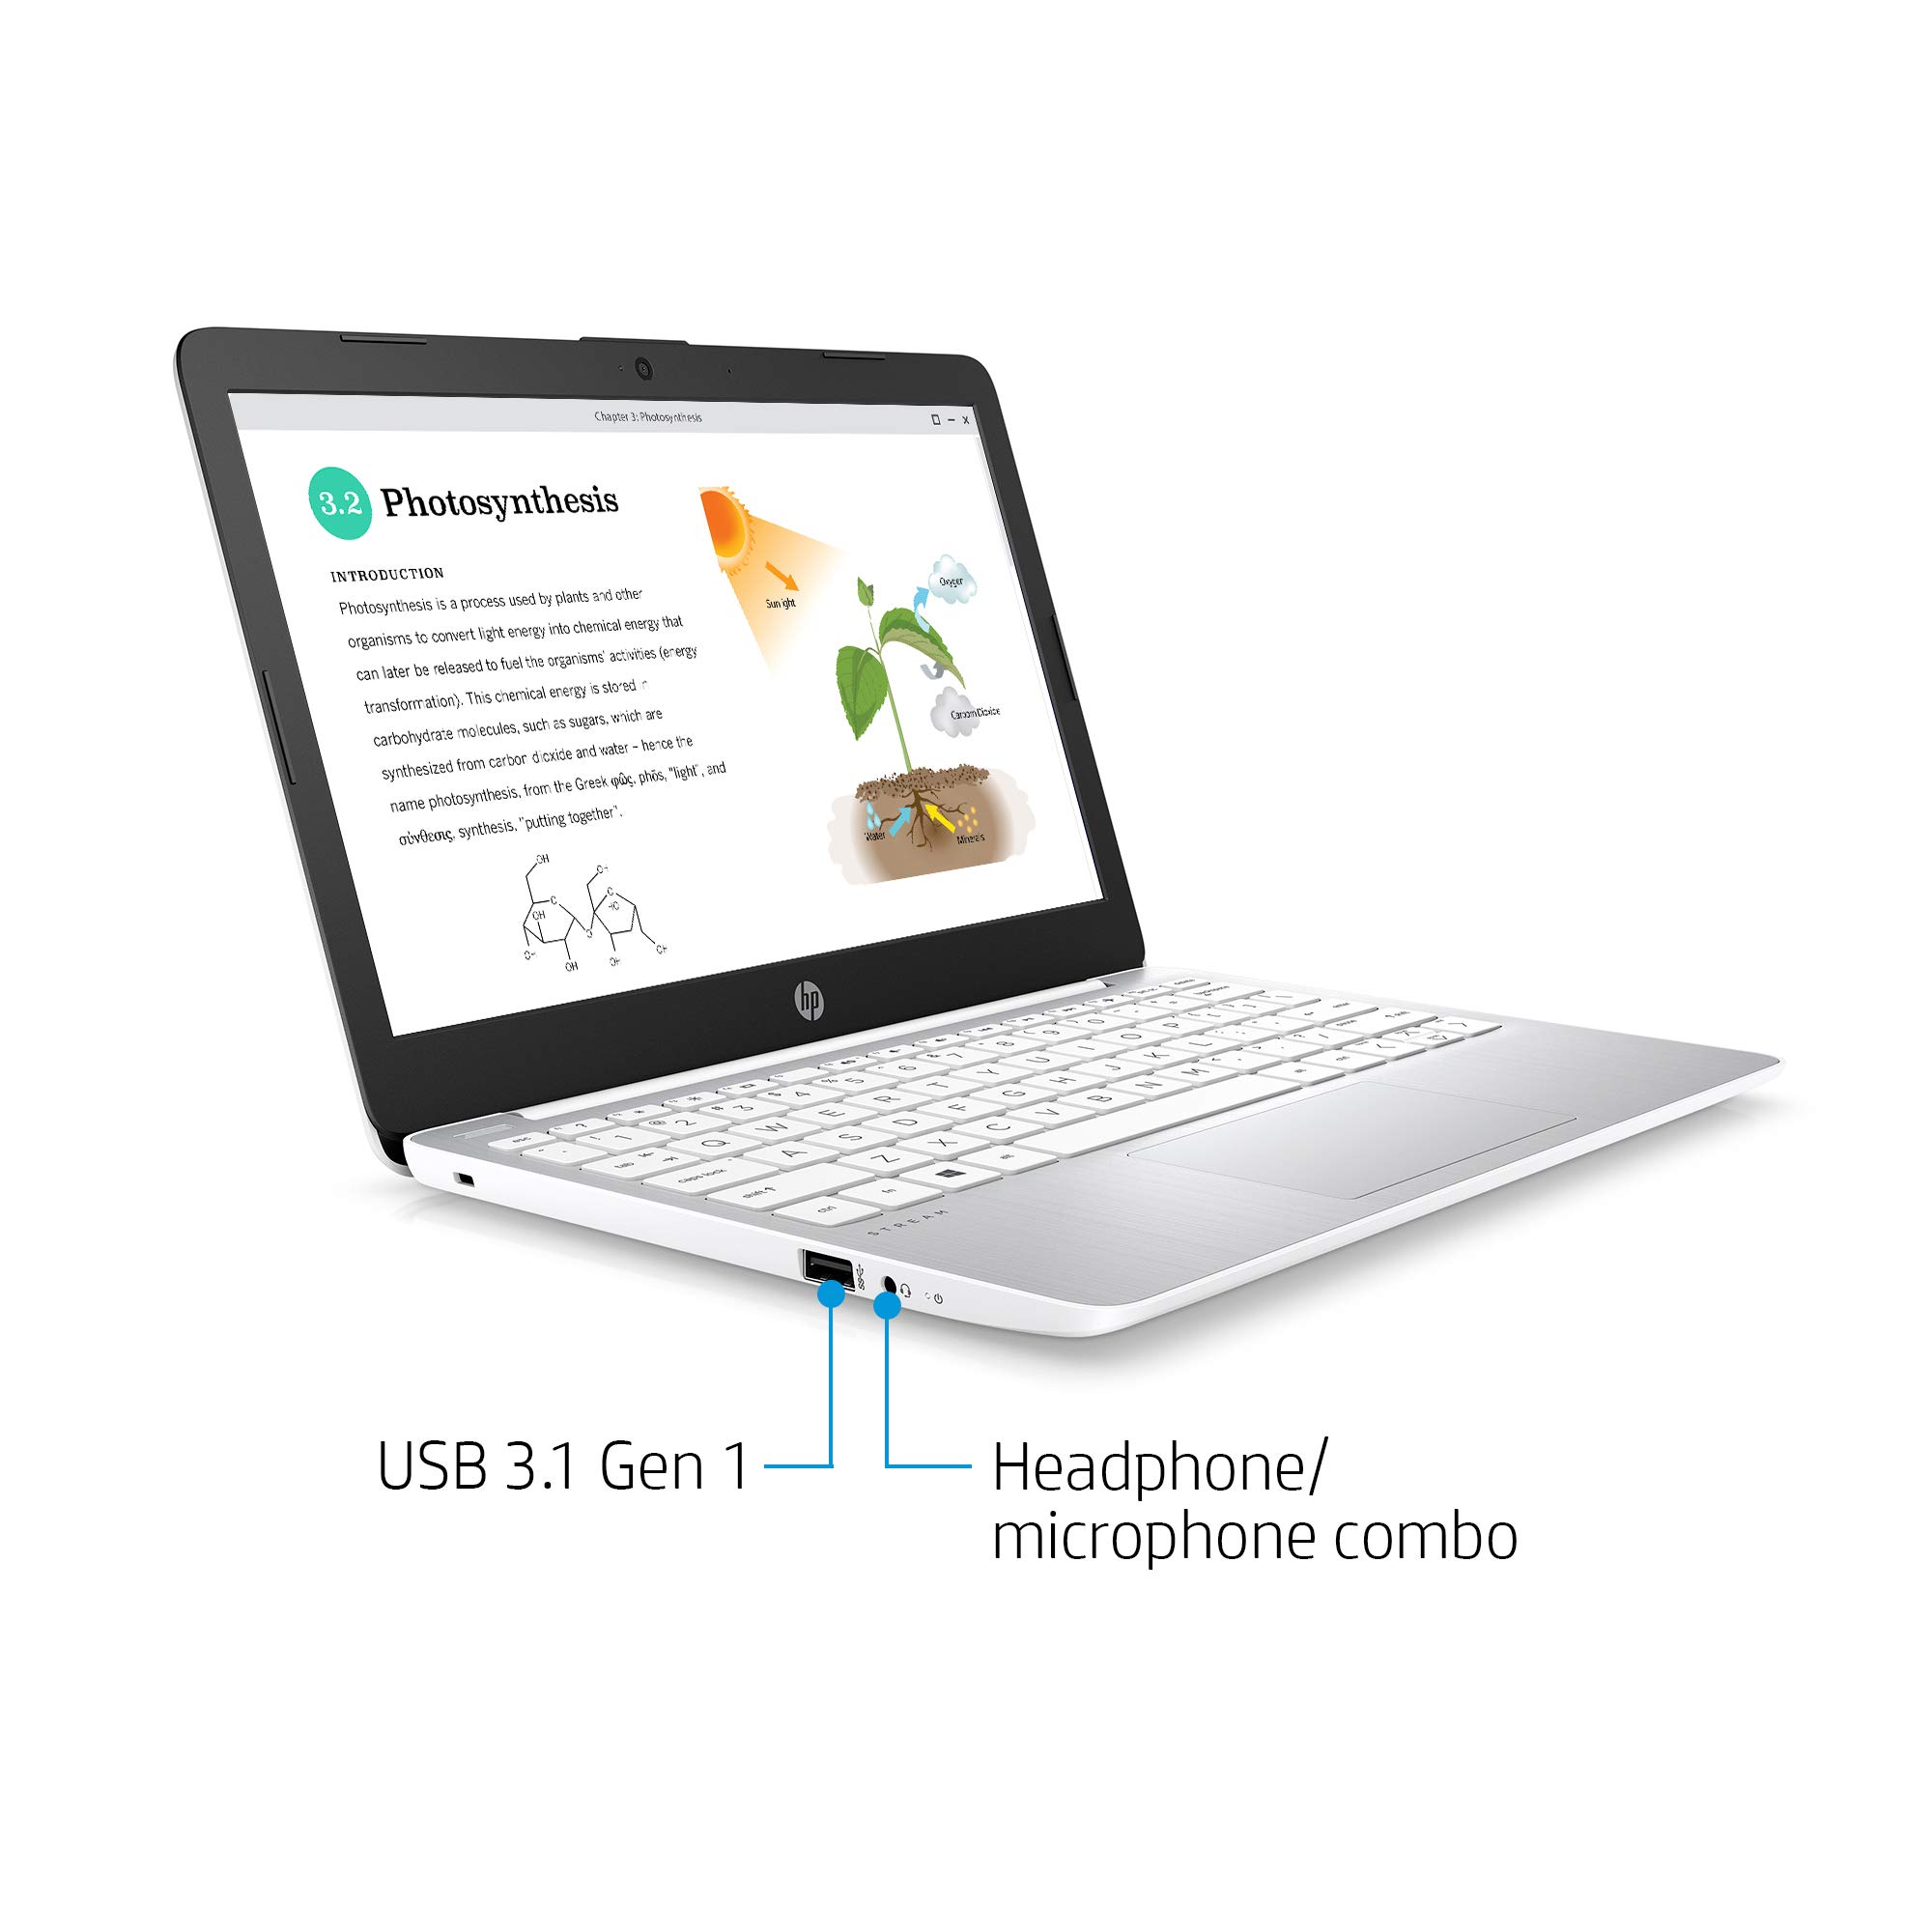 HP Stream 11.6-inch HD Laptop, Intel Celeron N4000, 4 GB RAM, 32 GB eMMC, Windows 10 Home in S Mode with Office 365 Personal for 1 Year (11-ak0020nr, Diamond White)